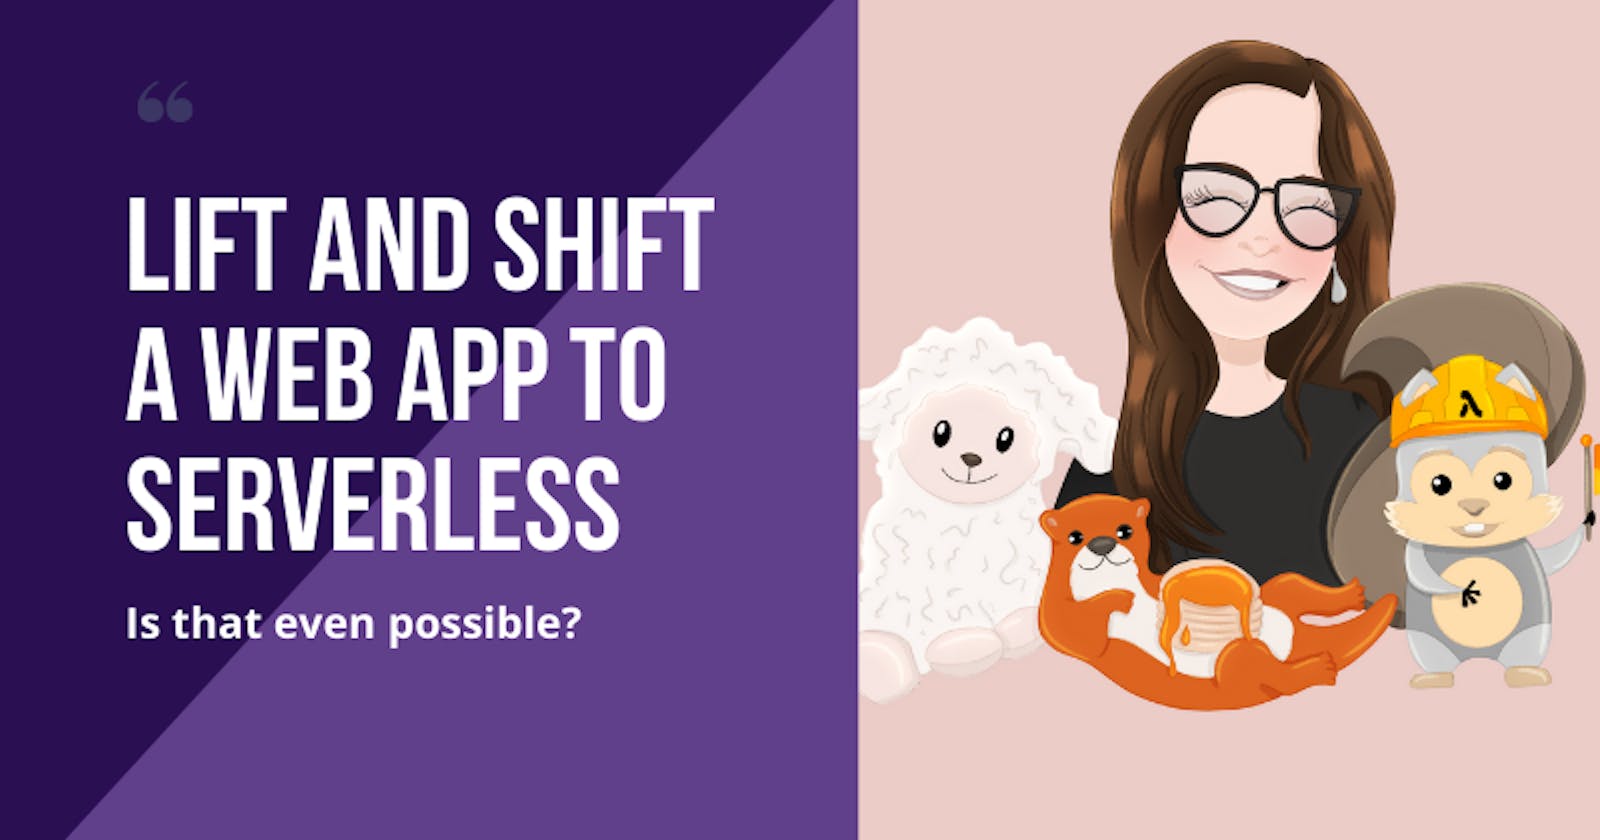 Lift and Shift a Web App to Serverless. Is that even possible?